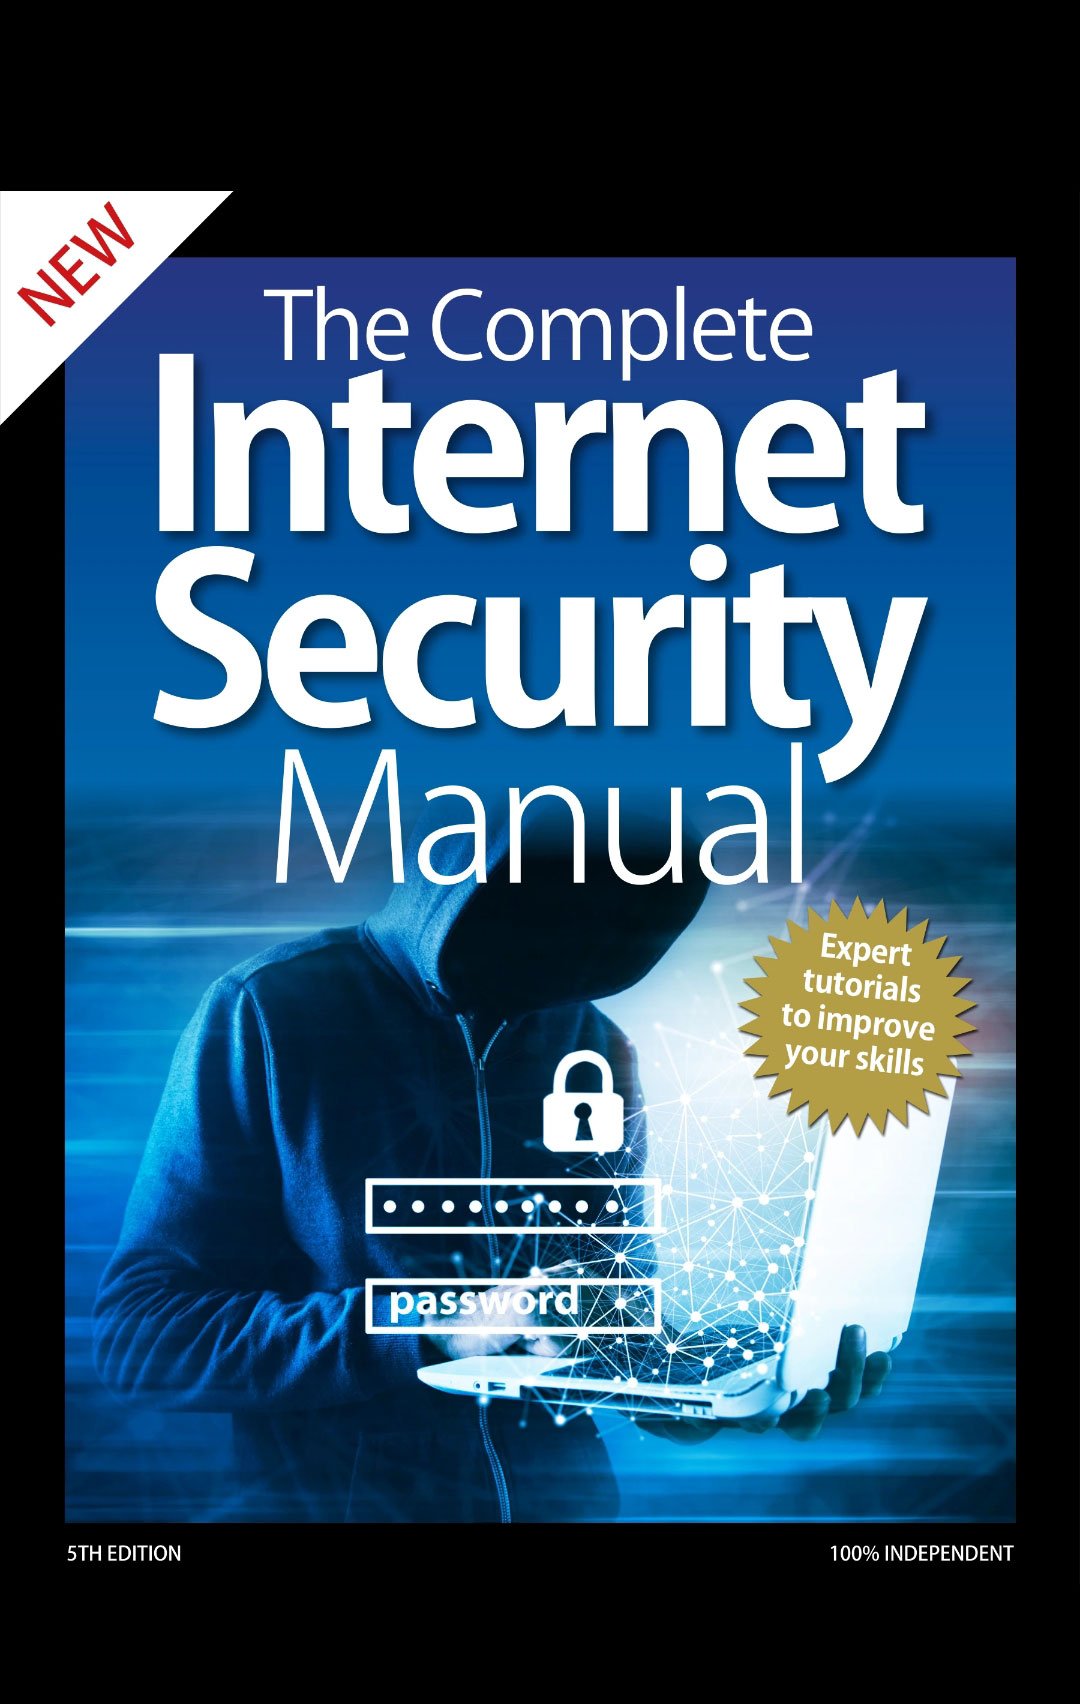 The Complete Internet Security Manual, 5th Edition